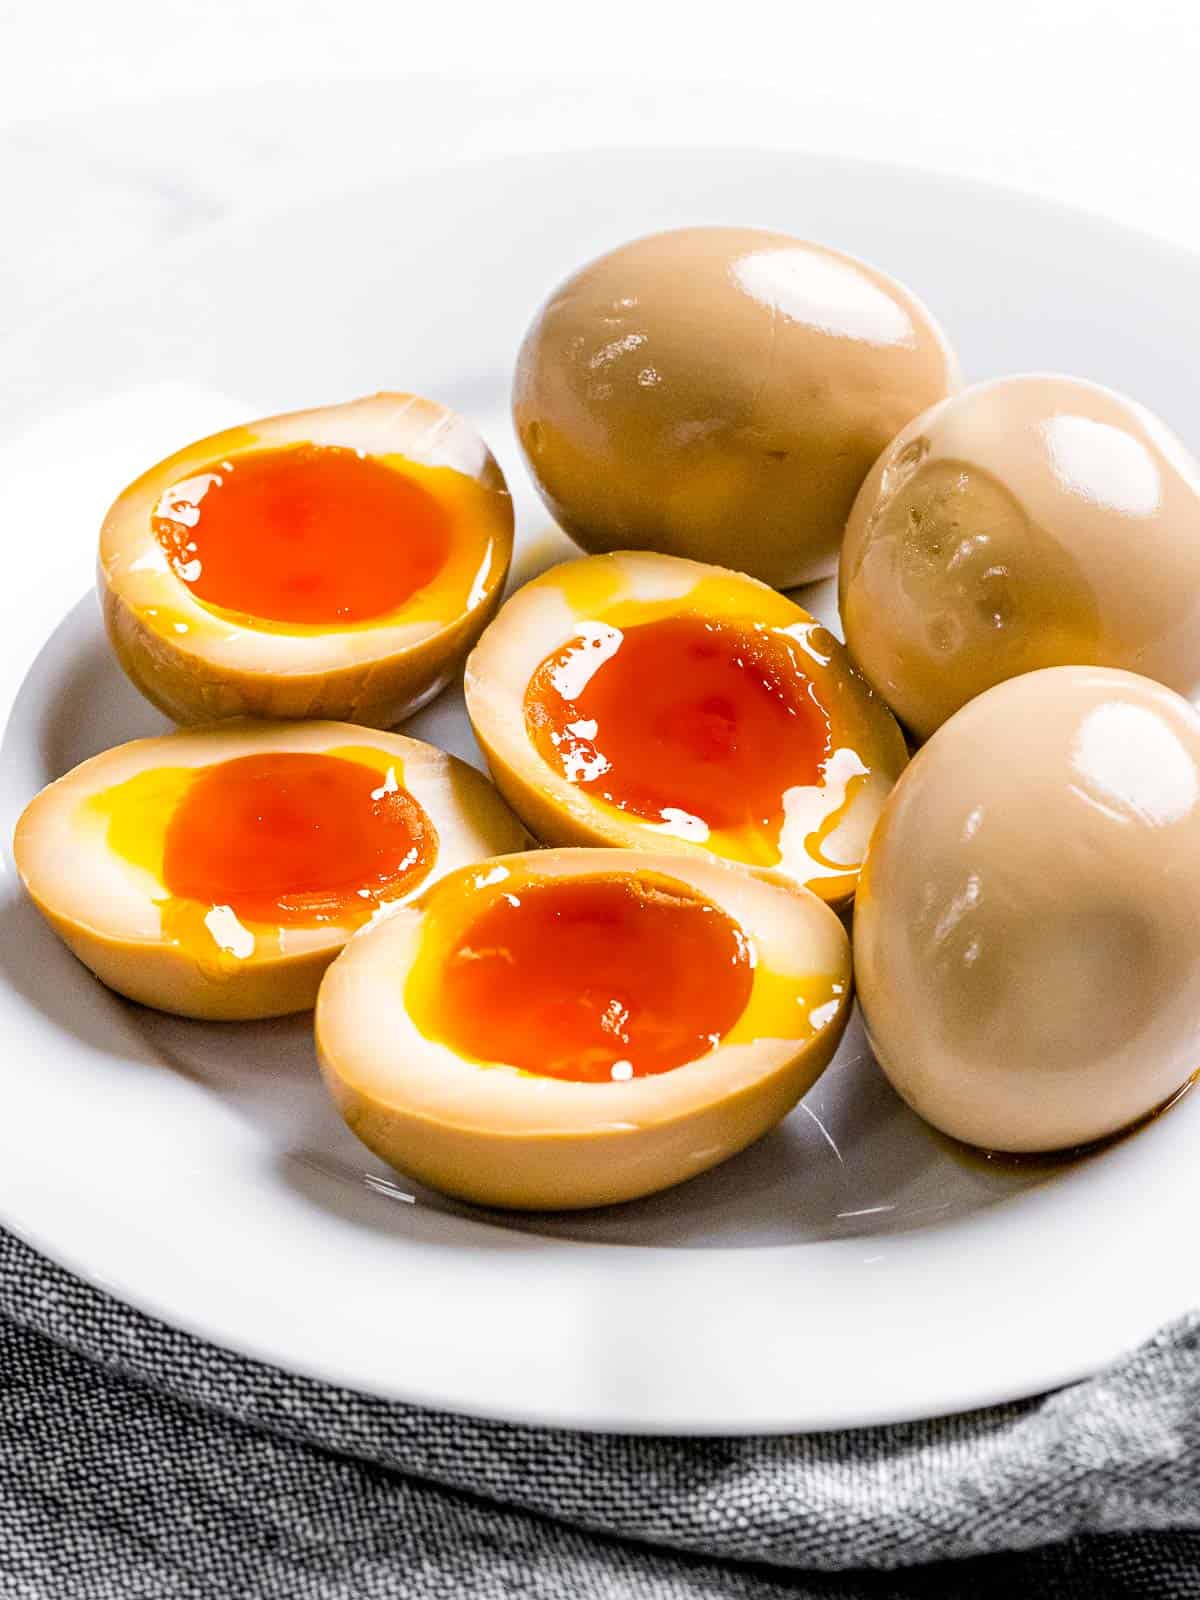 Ramen eggs marinated in soy sauce with soft boiled yolk cut in half to show orange, runny yolk on a plate.